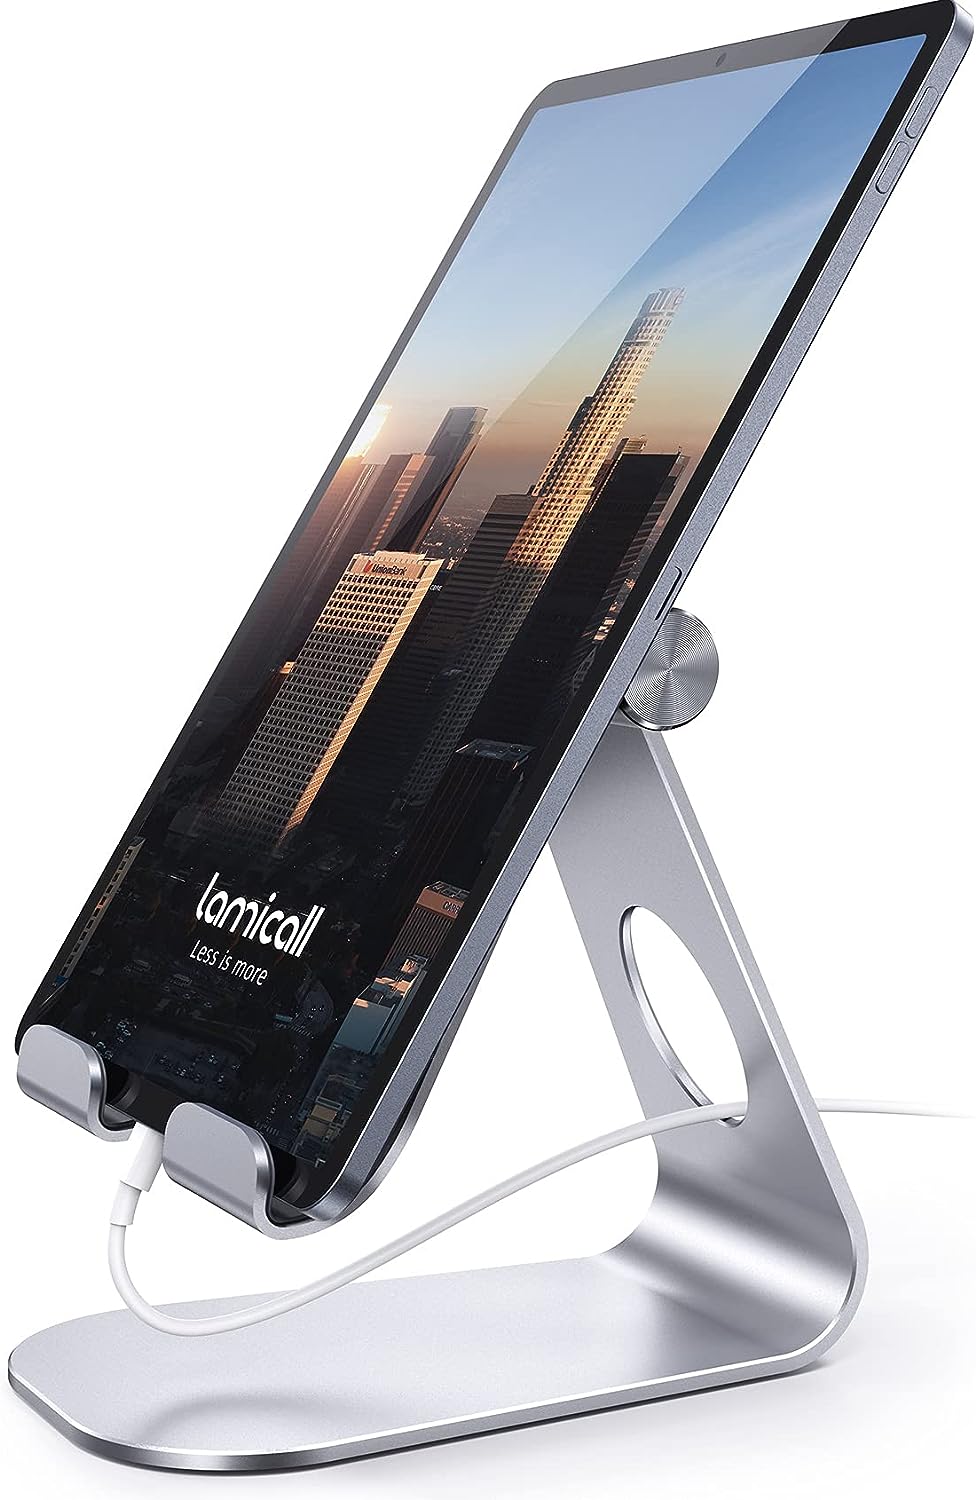 Tablet Stand, Lamicall Adjustable Tablet Stand Holder - Desktop Dock Cradle Compatible with iPad Pro 12.9 11 Air 4 10.9 Mini 7.9, Switch, Galaxy Tab and more (4-13") Devices - Silver